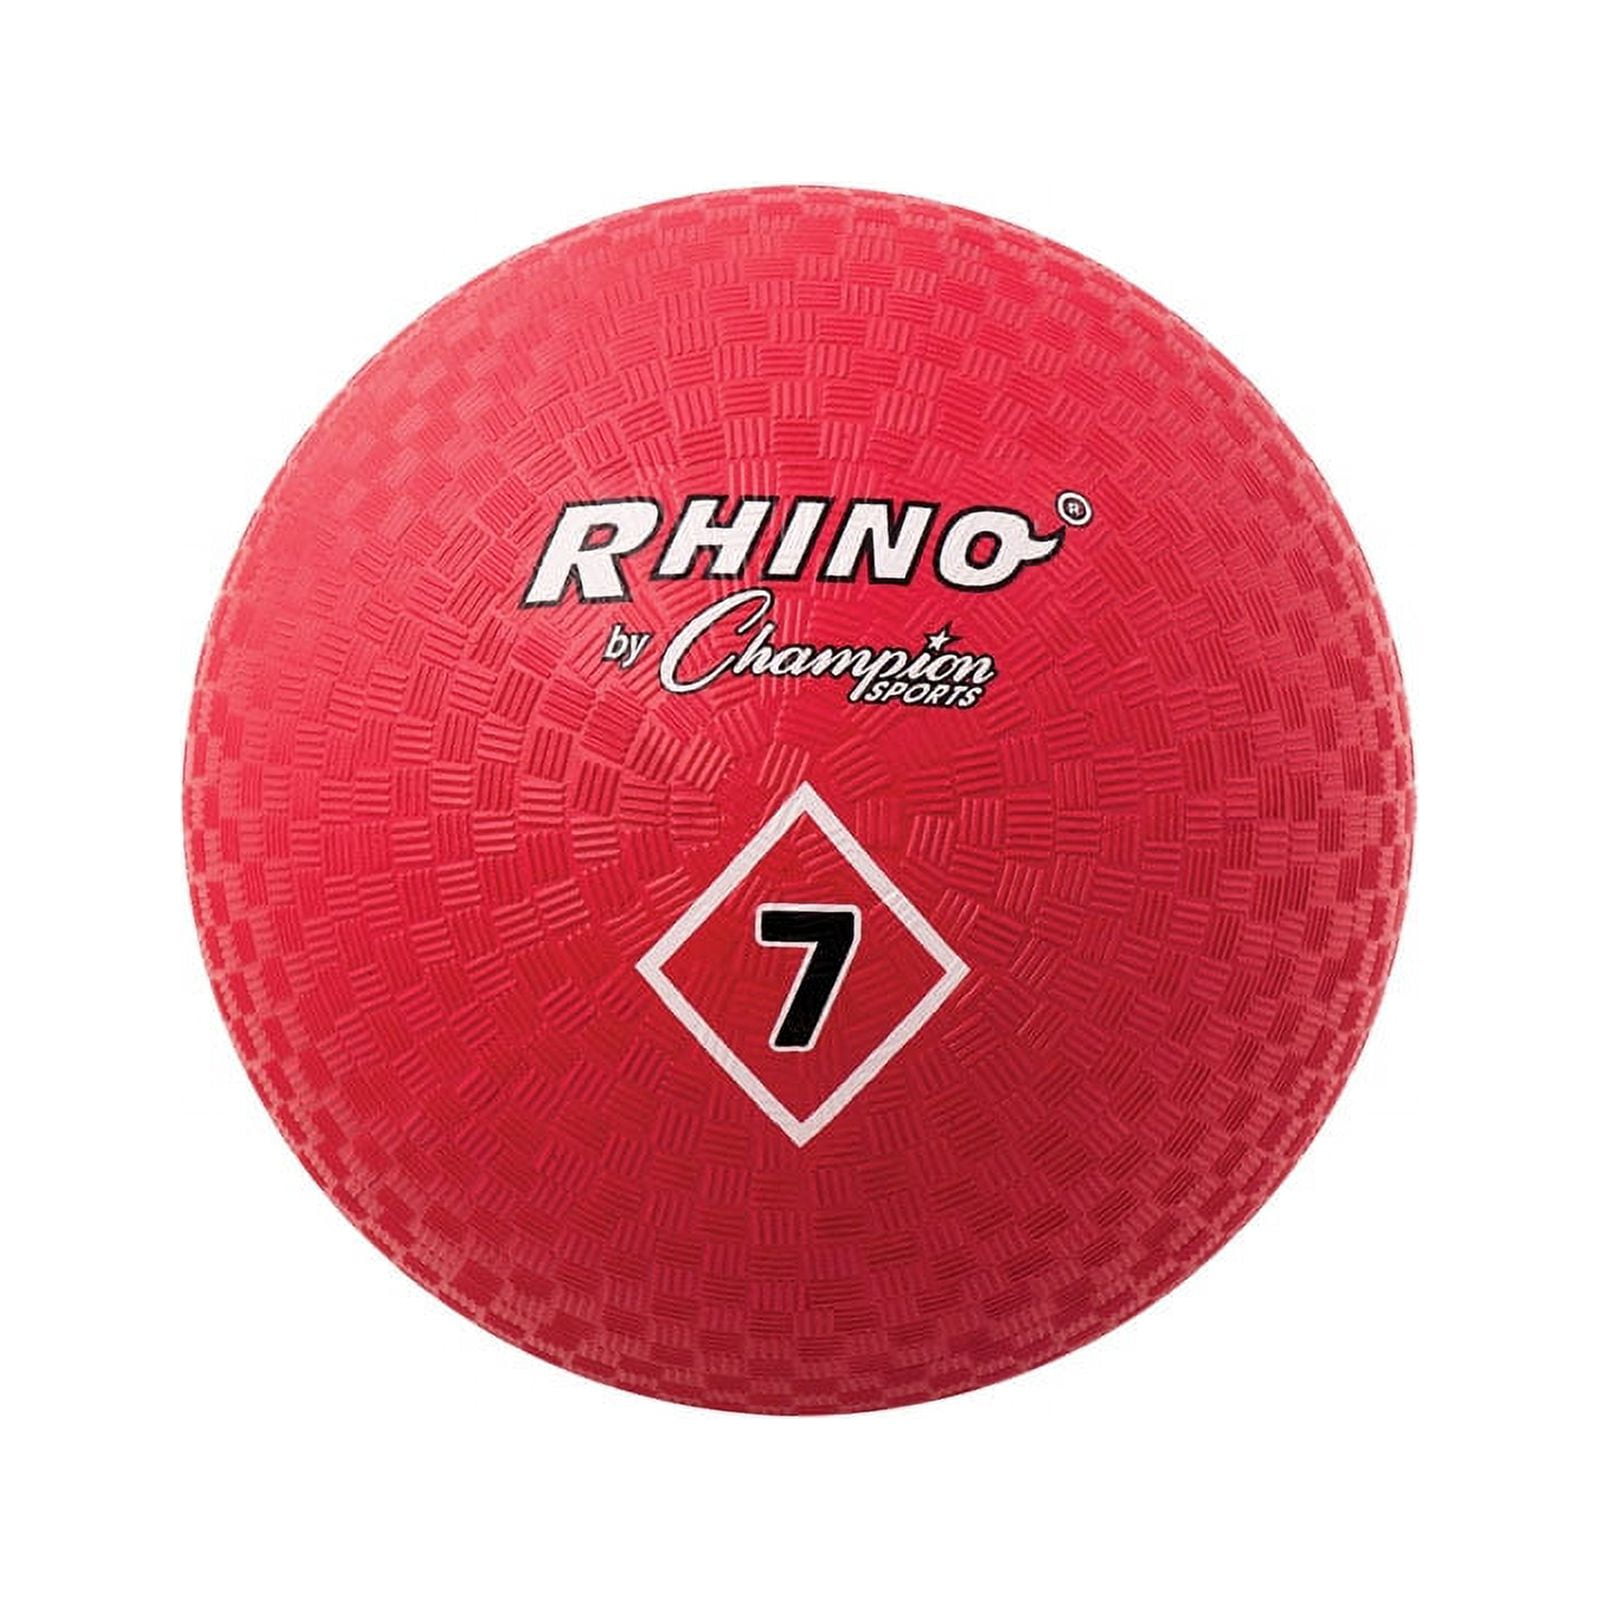 Champion Sports Hi-density Coated Foam Ball, 4, Red, Pack Of 6 : Target